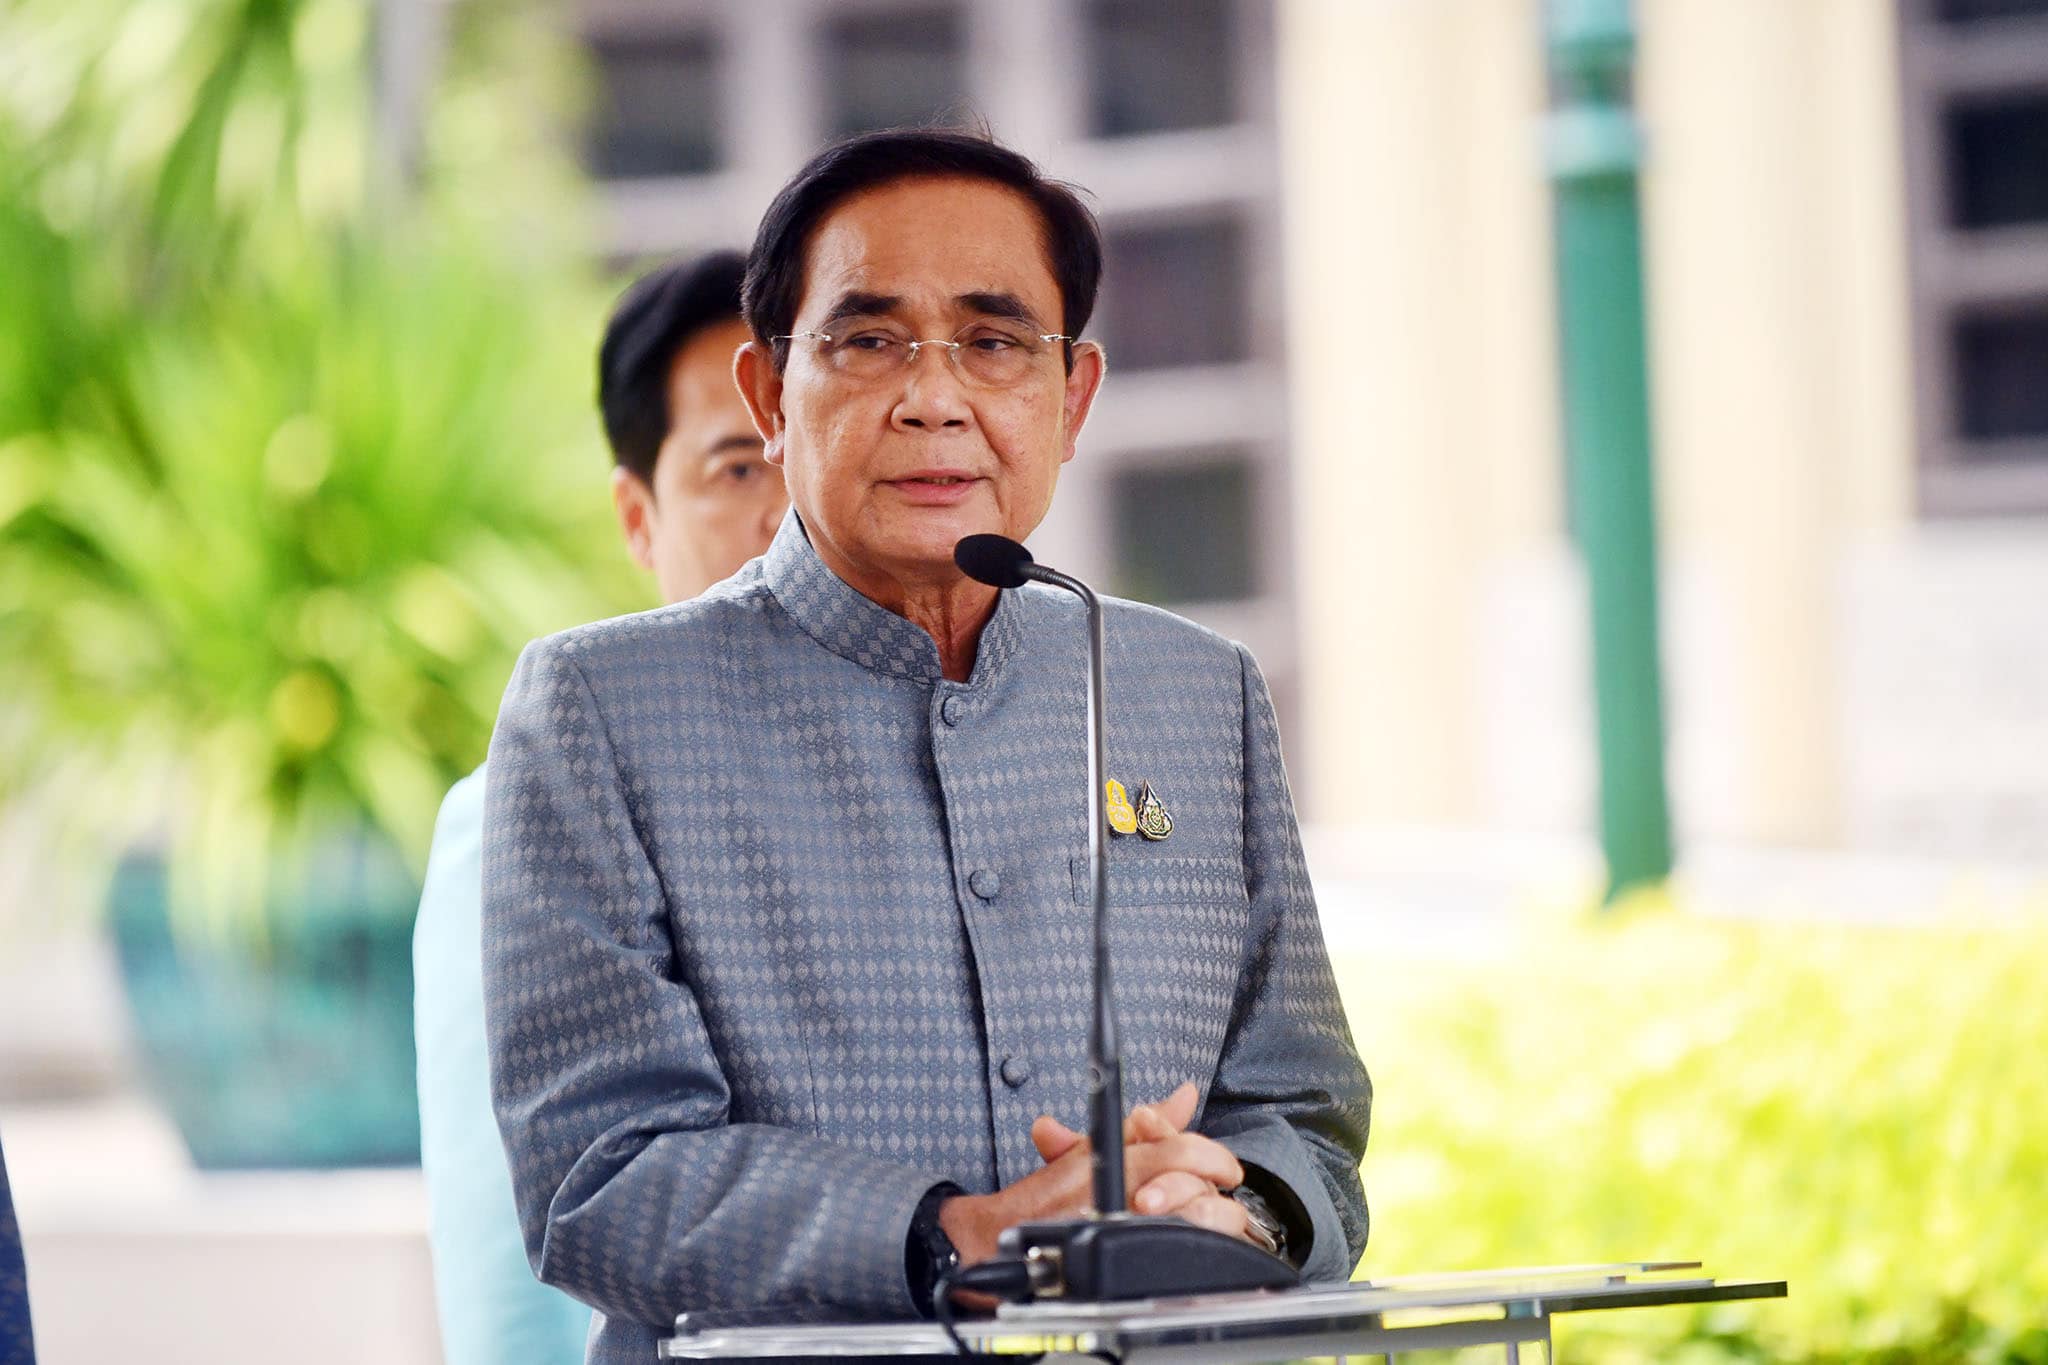 Thai Prime Minister Prayut Chan-ocha during the general election campaign.